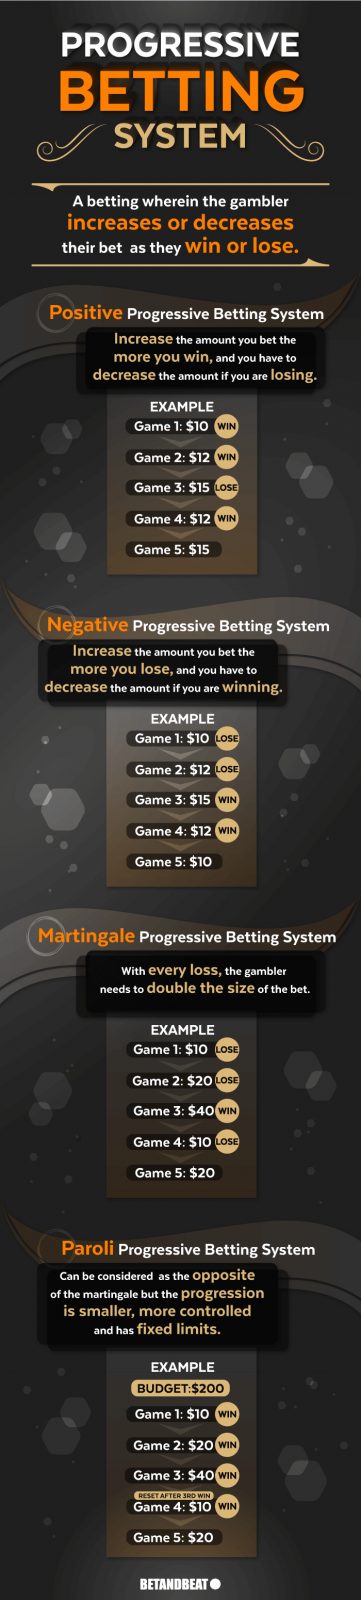 Progressive Betting in Roulette: Pros and Cons